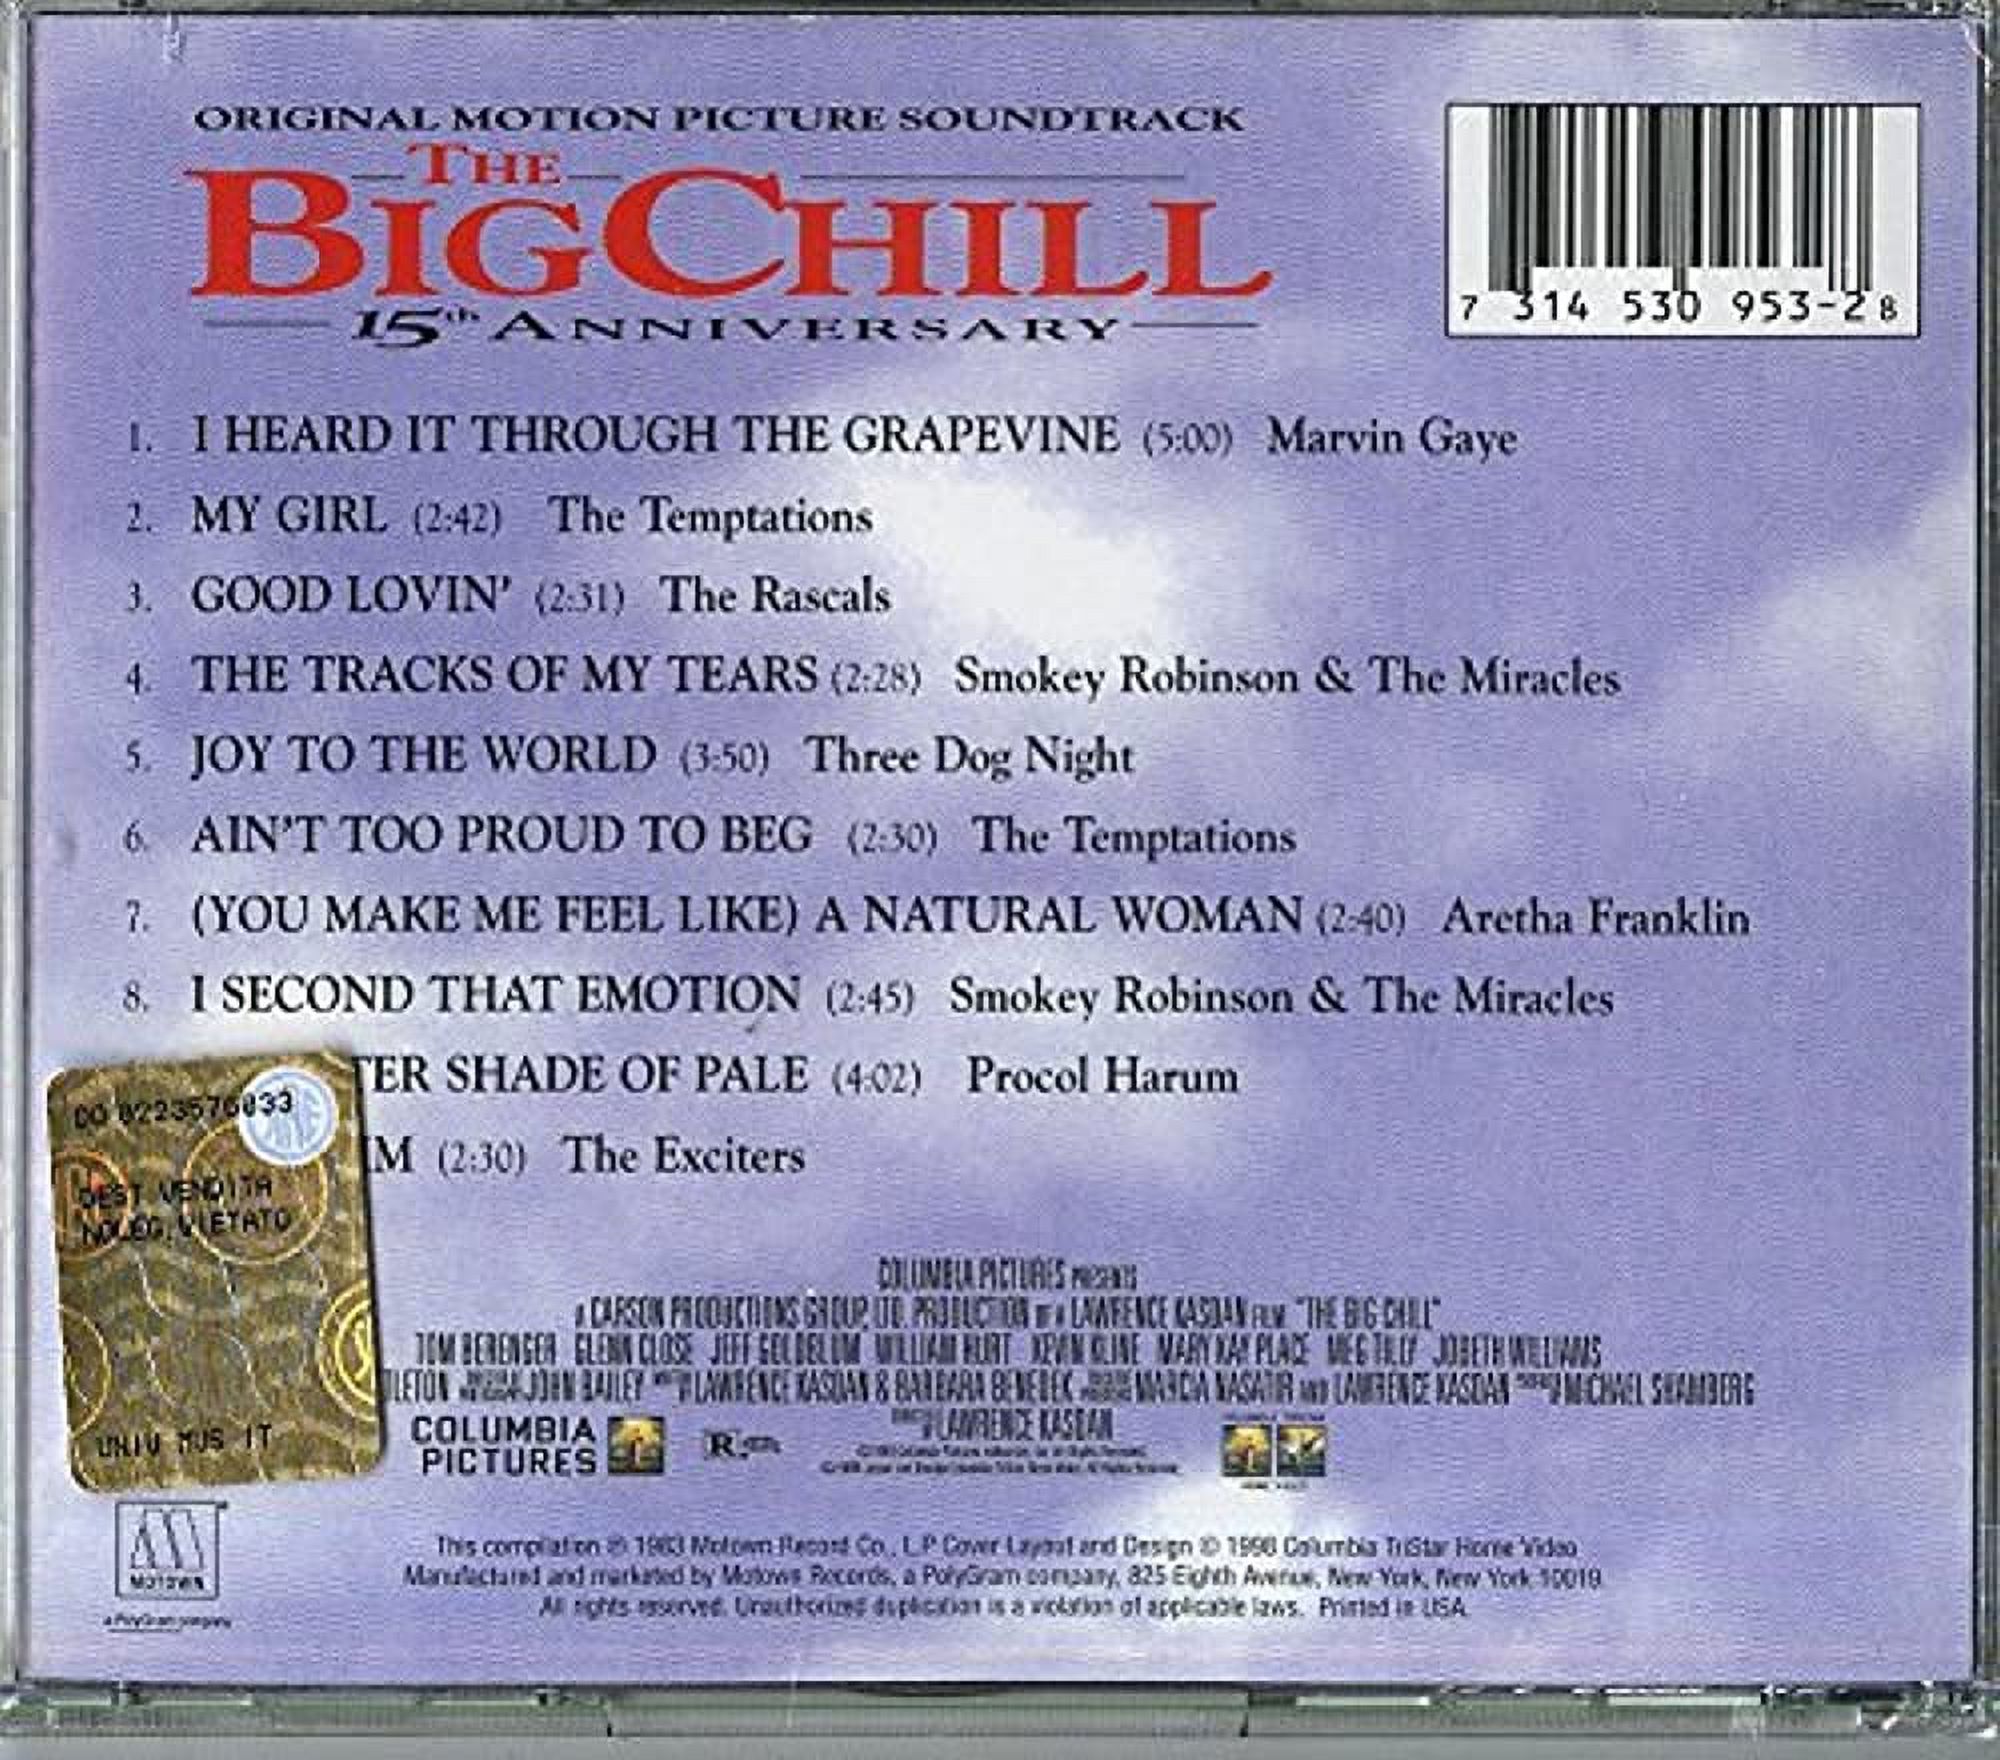 Artists　Soundtrack　Various　Chill　Big　The　CD